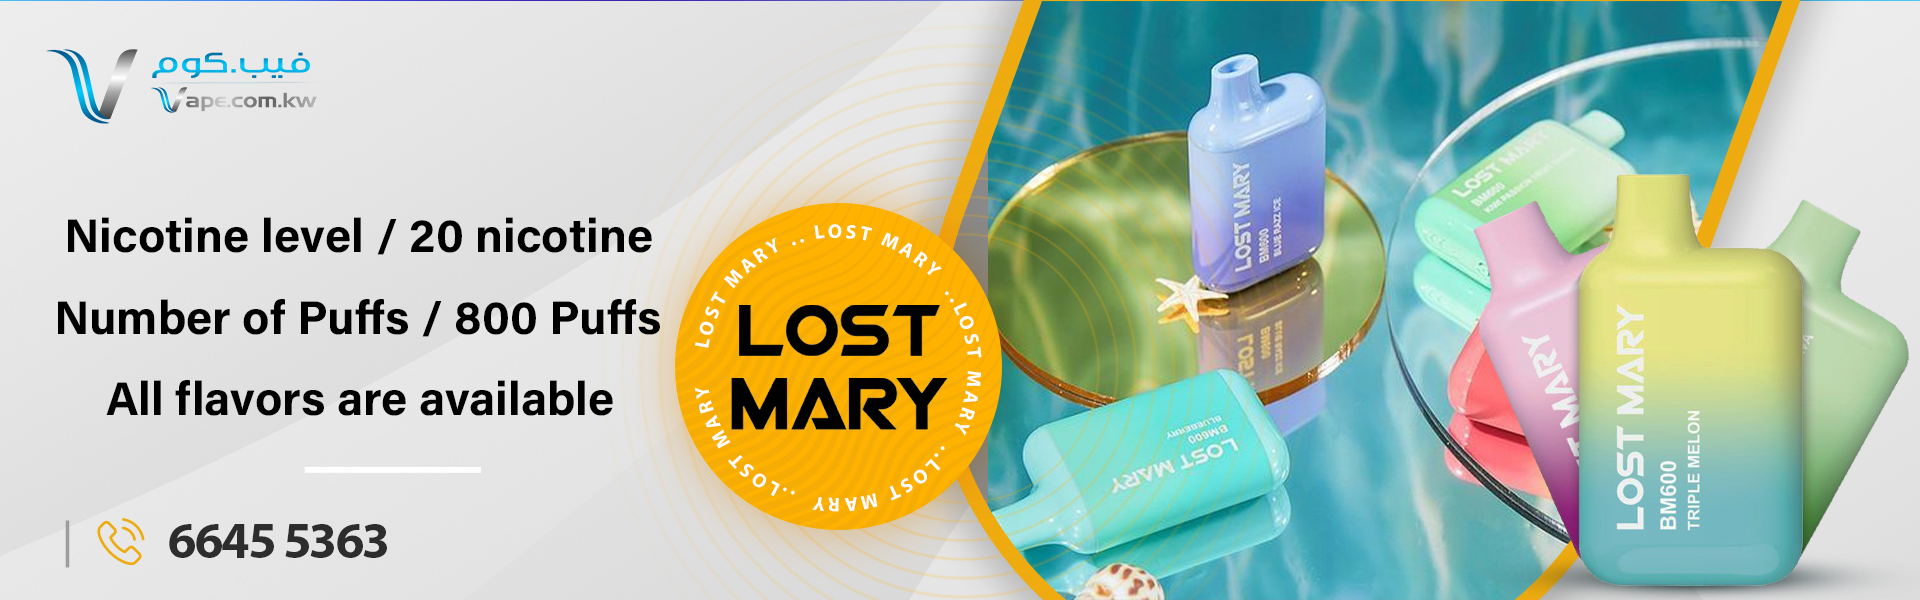 LOST MARY BANNER